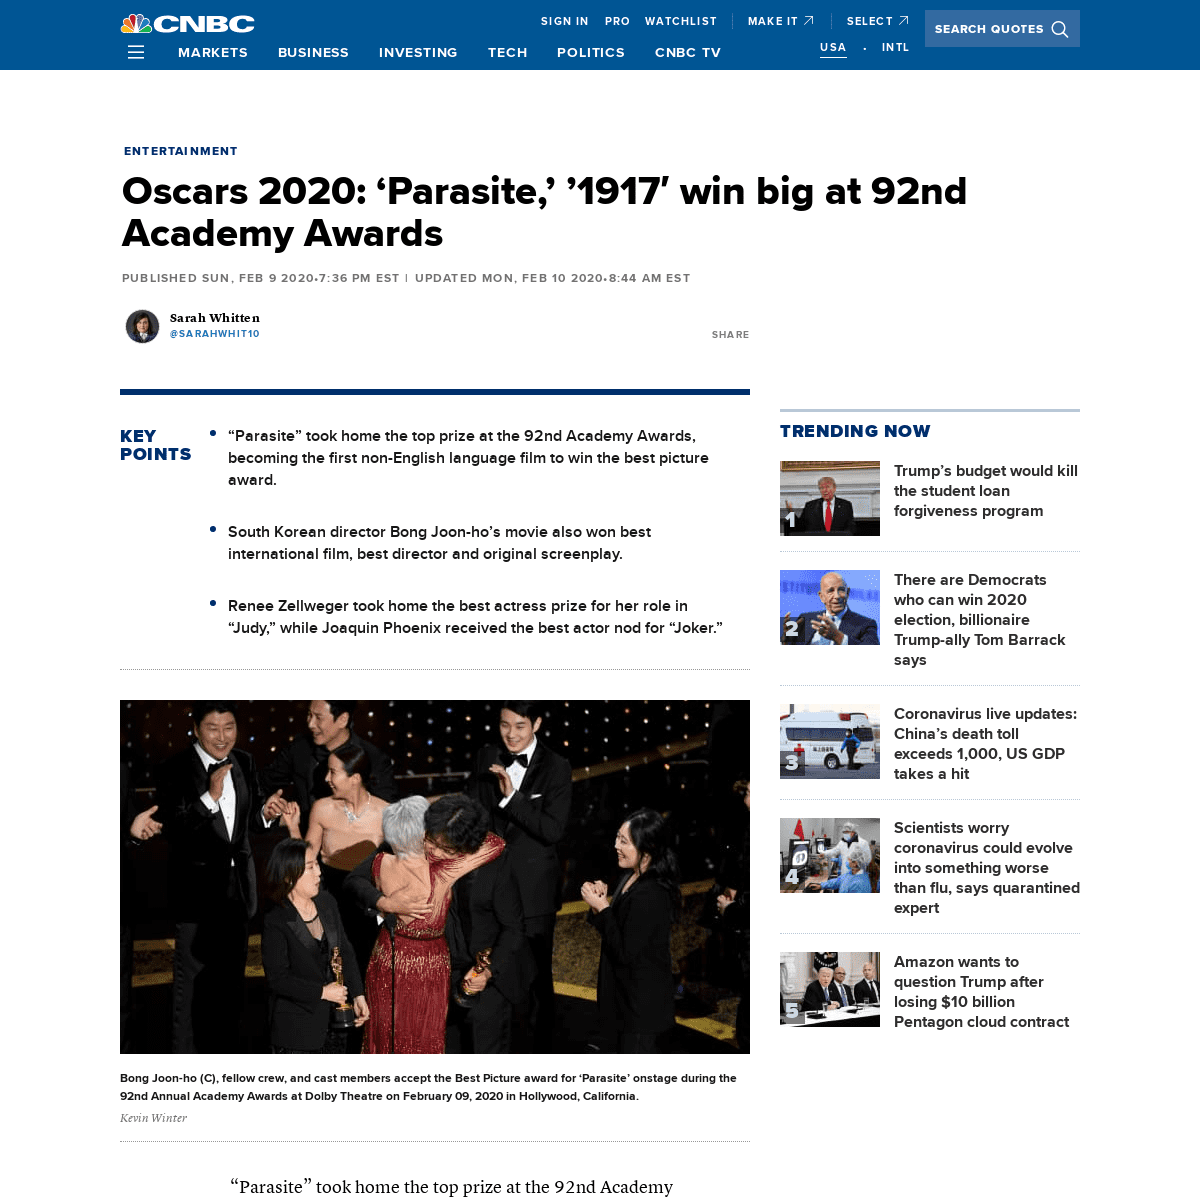 A complete backup of www.cnbc.com/2020/02/09/oscars-2020-the-complete-list-of-winners-for-the-92nd-academy-awards.html